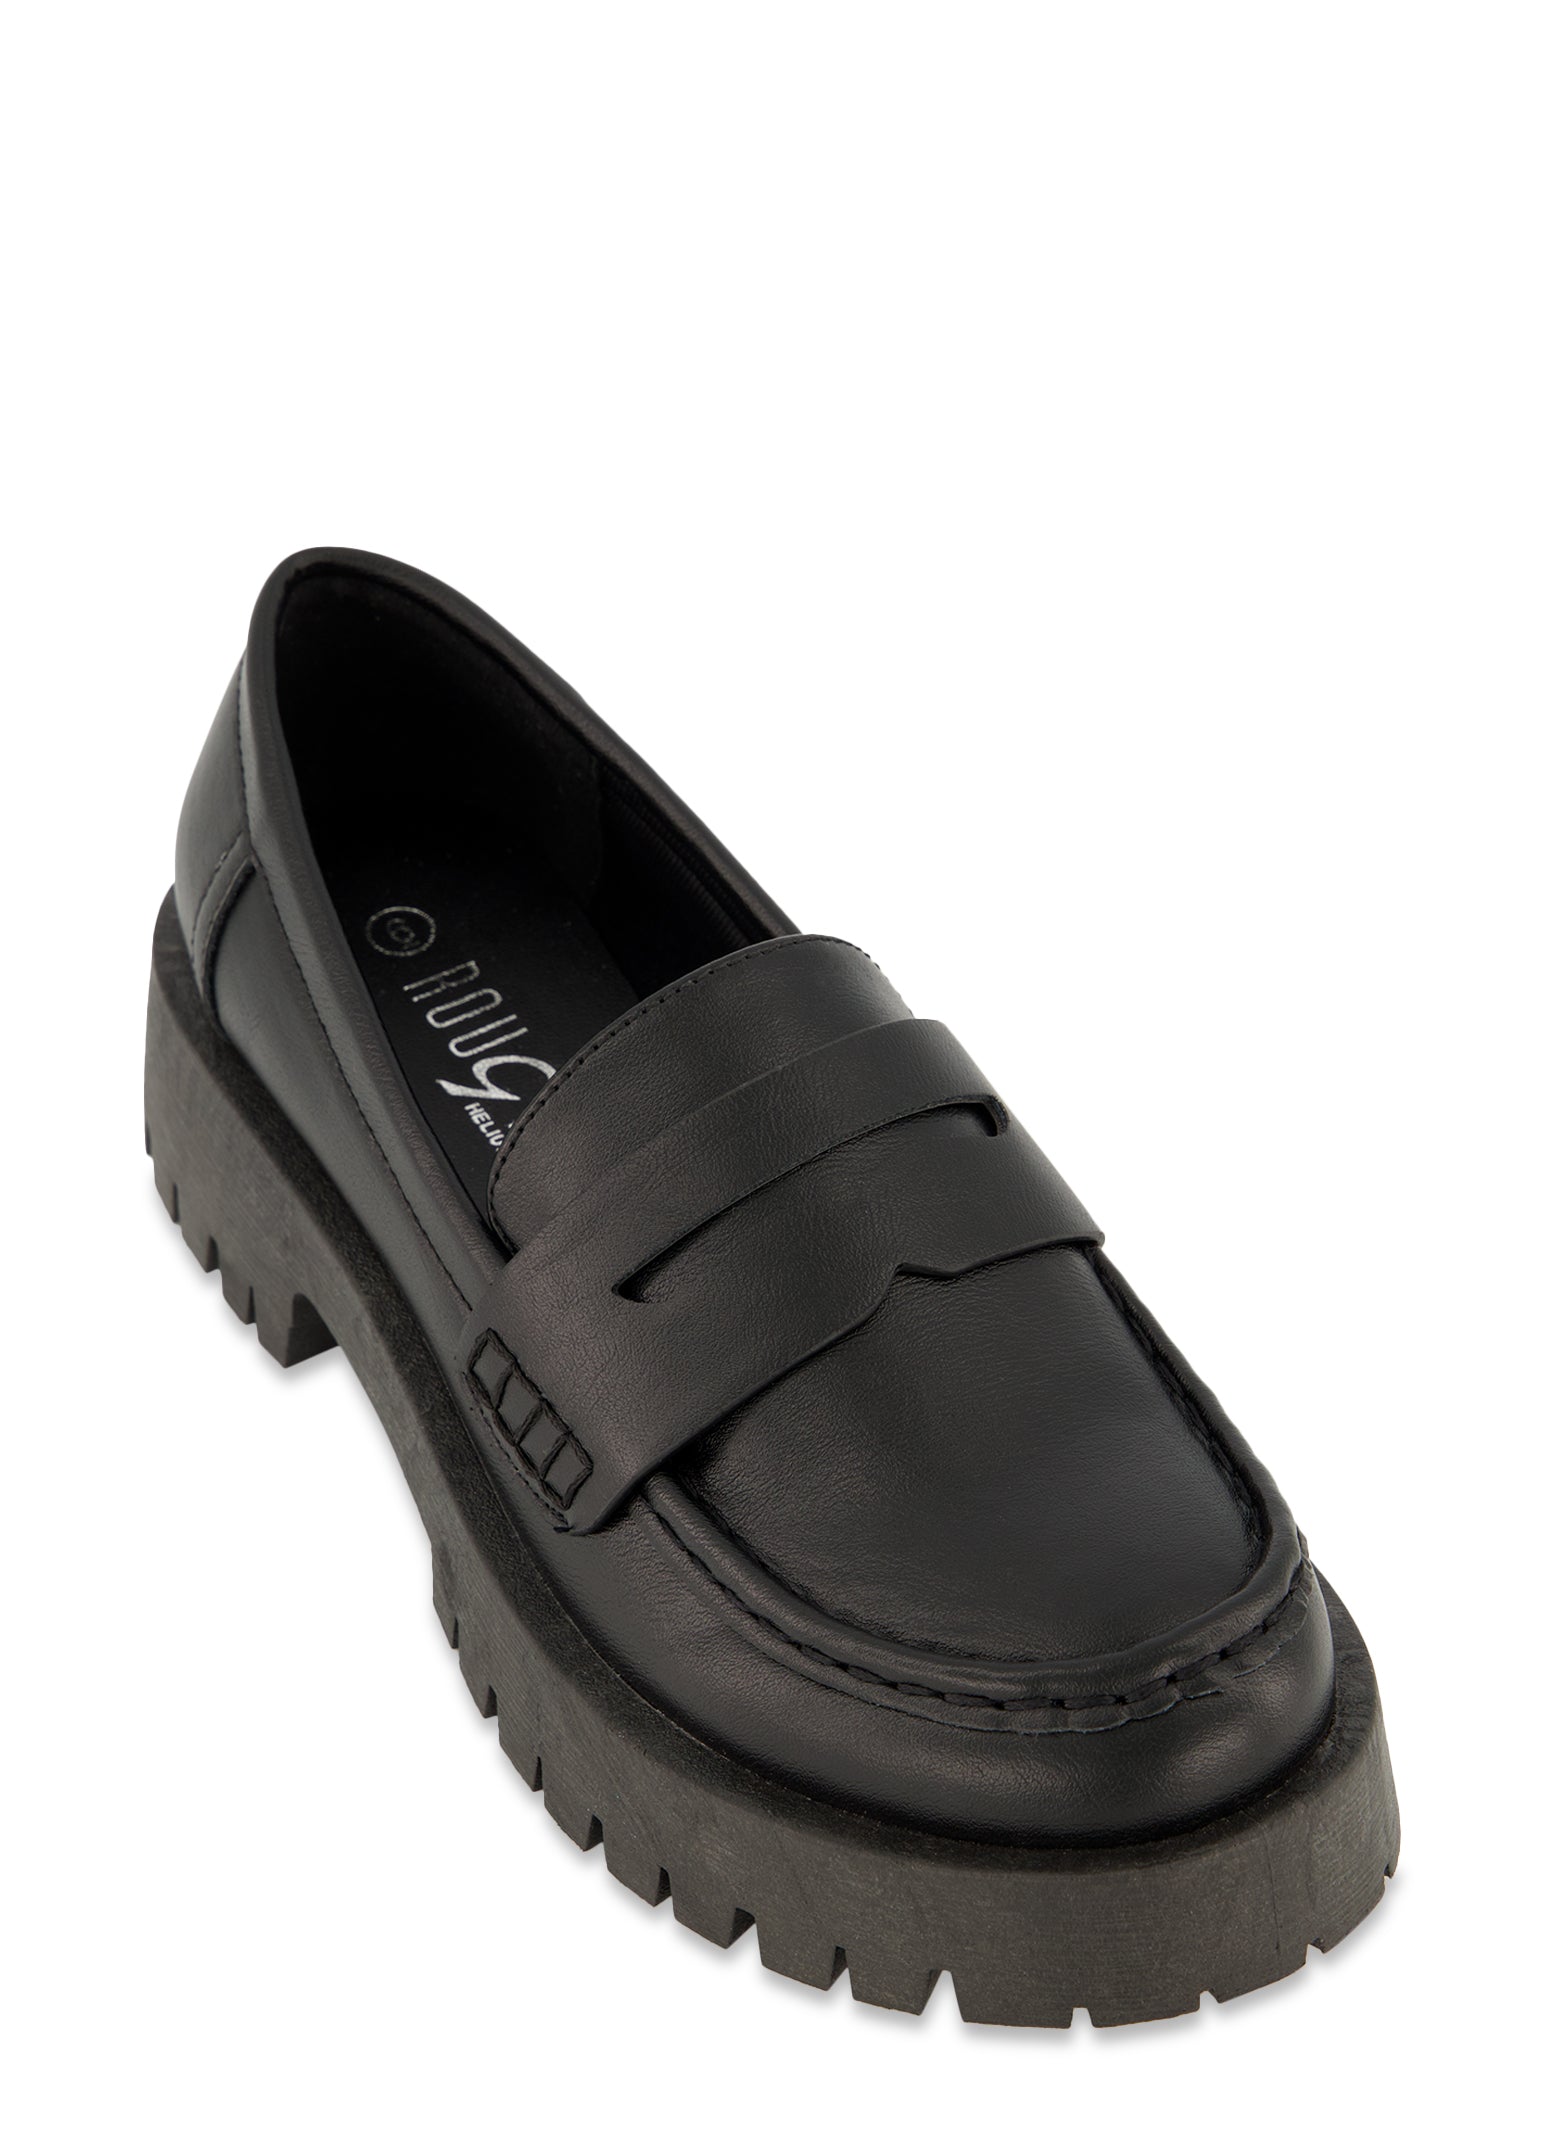 Solid Lug Sole Loafers